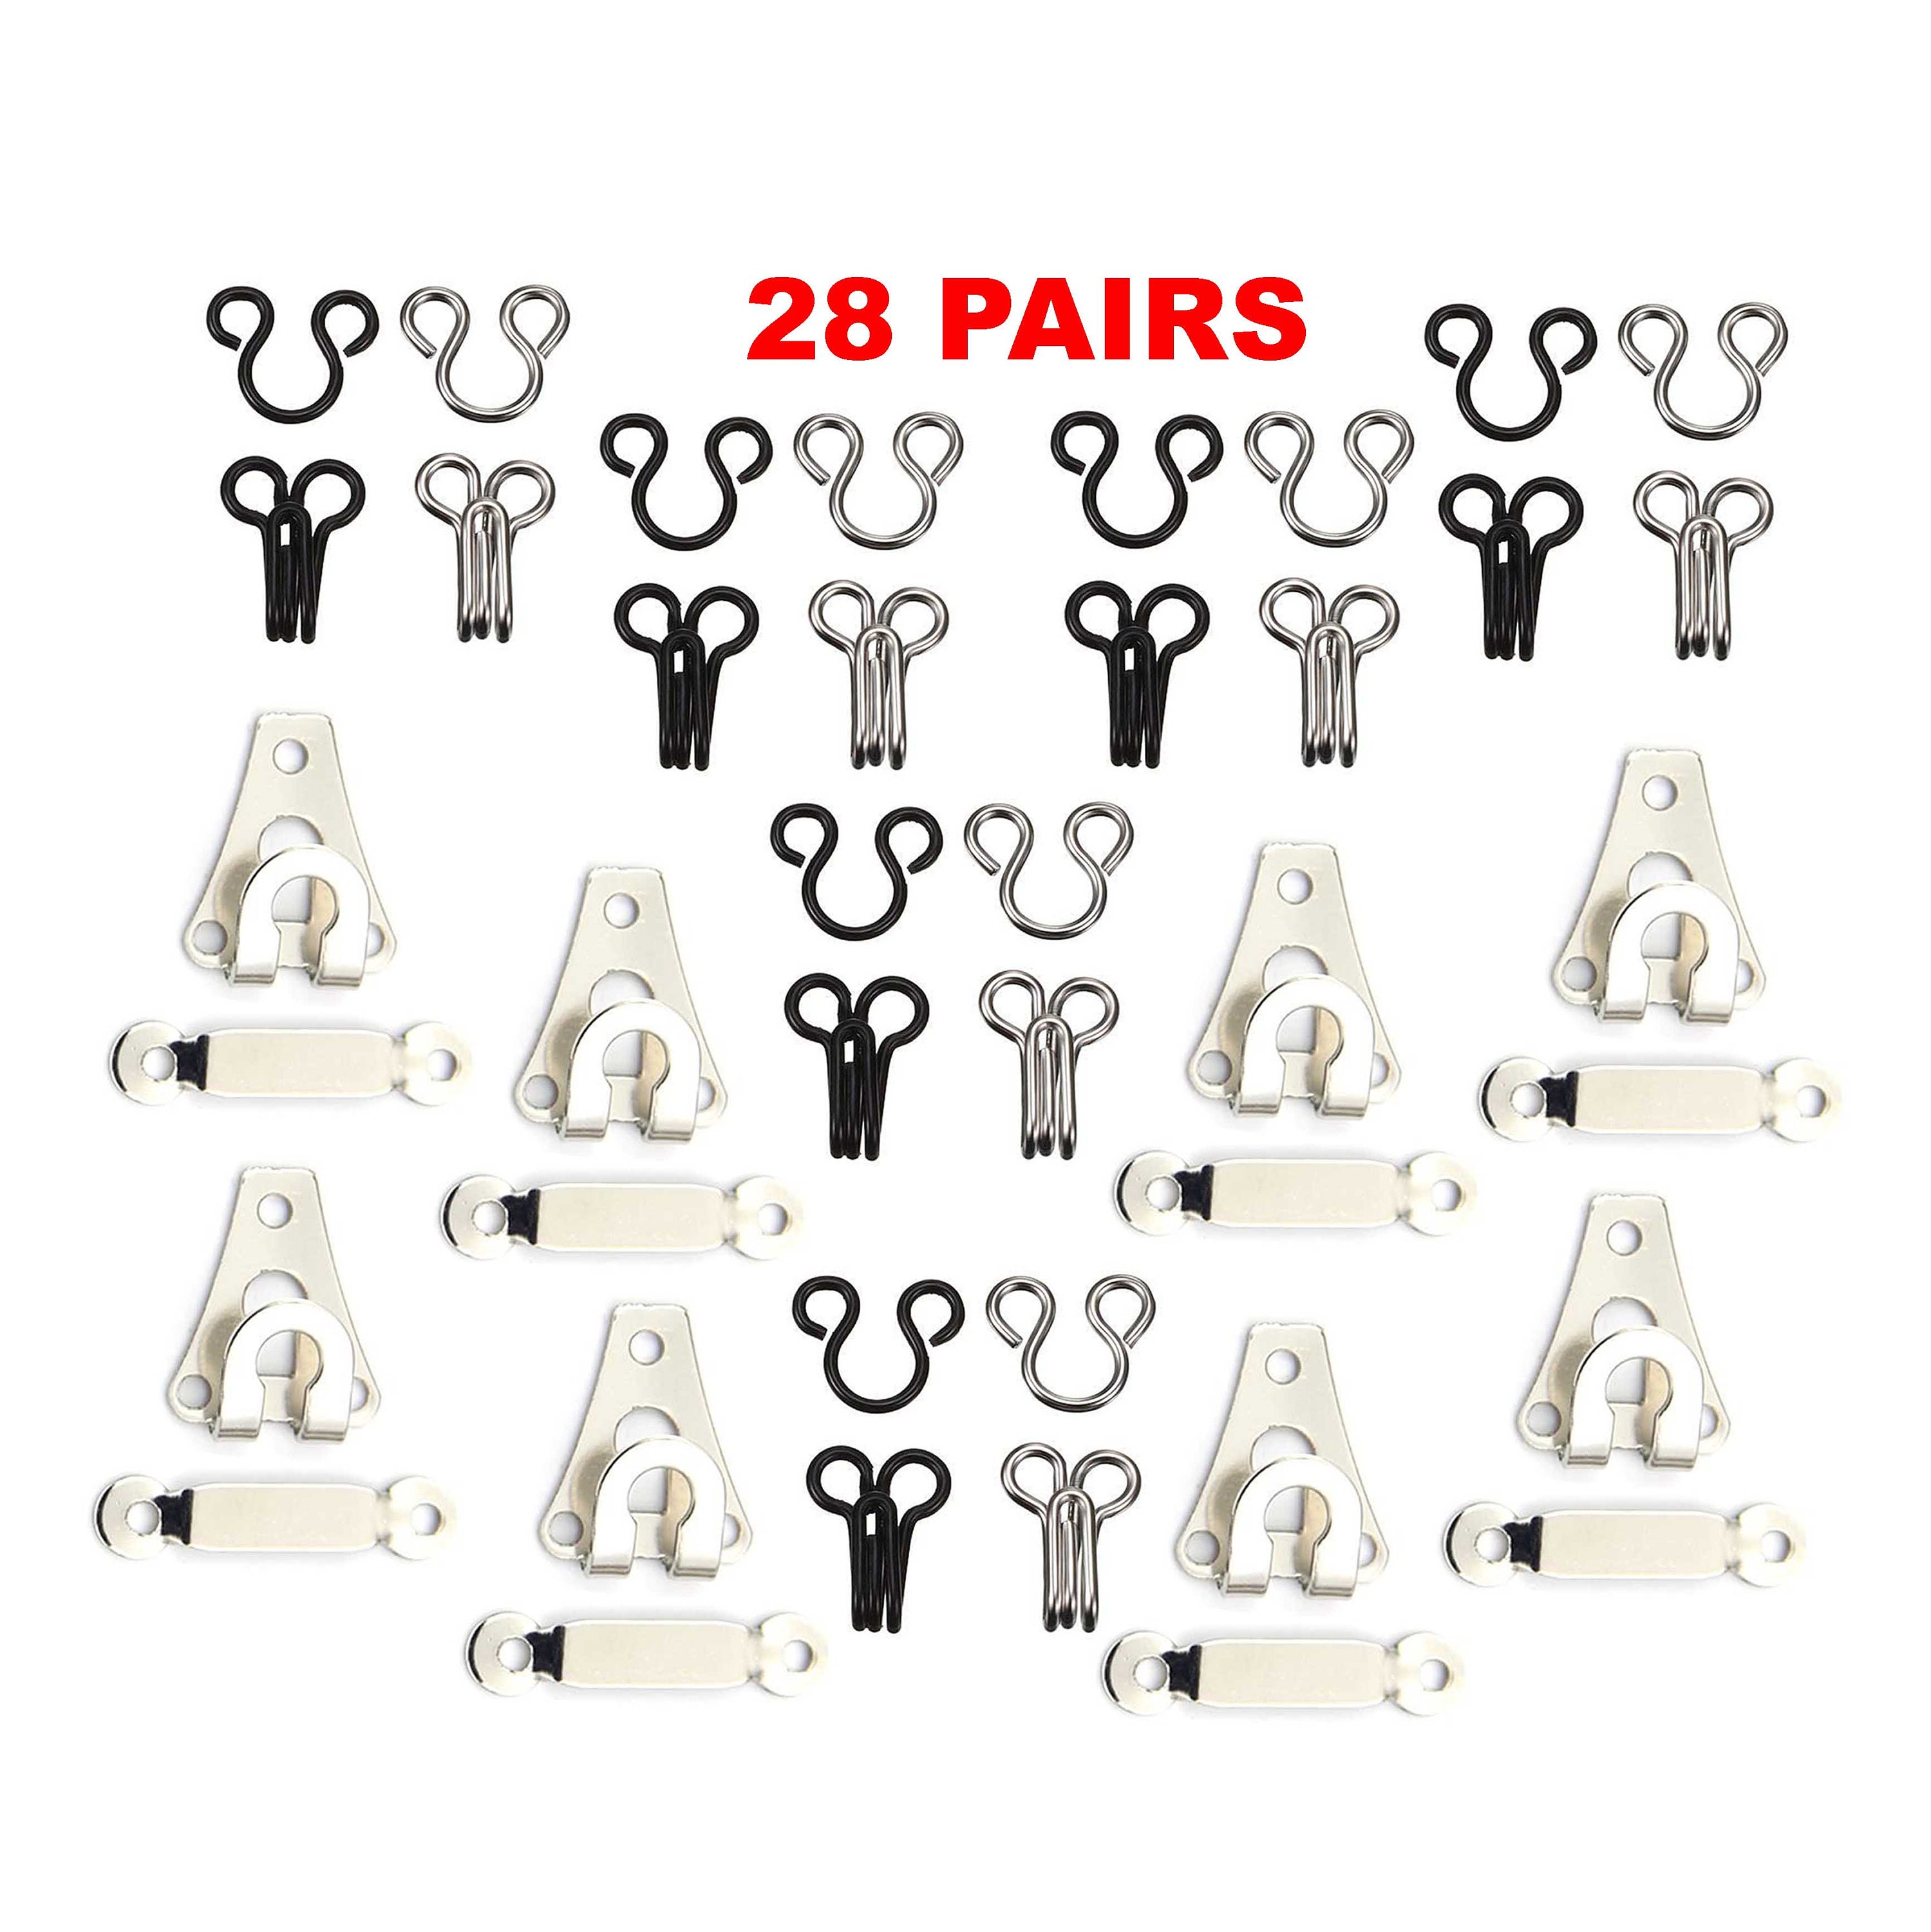 30 Sets Hook and Eye Closures - Sewing DIY, Bra Hooks Replacement